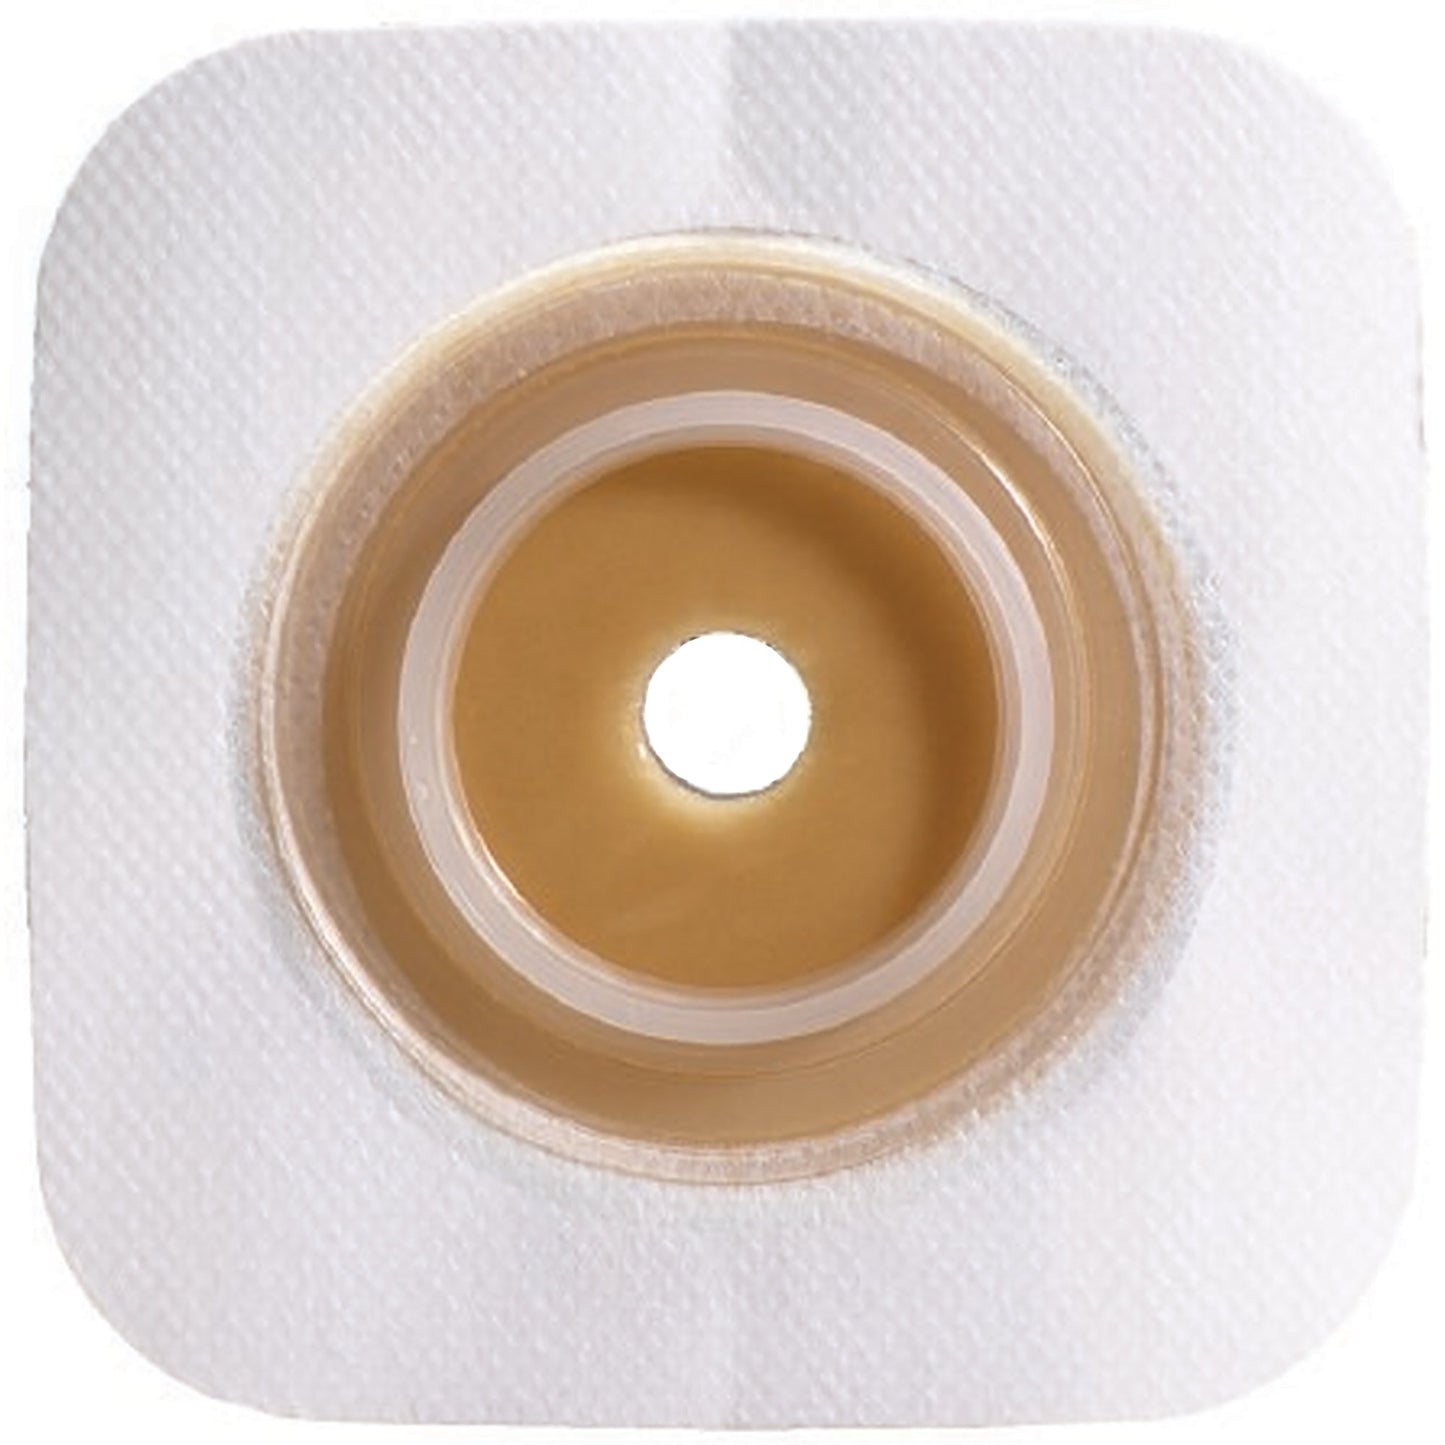 Sur-Fit Natura® Colostomy Barrier With 1 7/8-2.5 " Stoma Opening, Tan